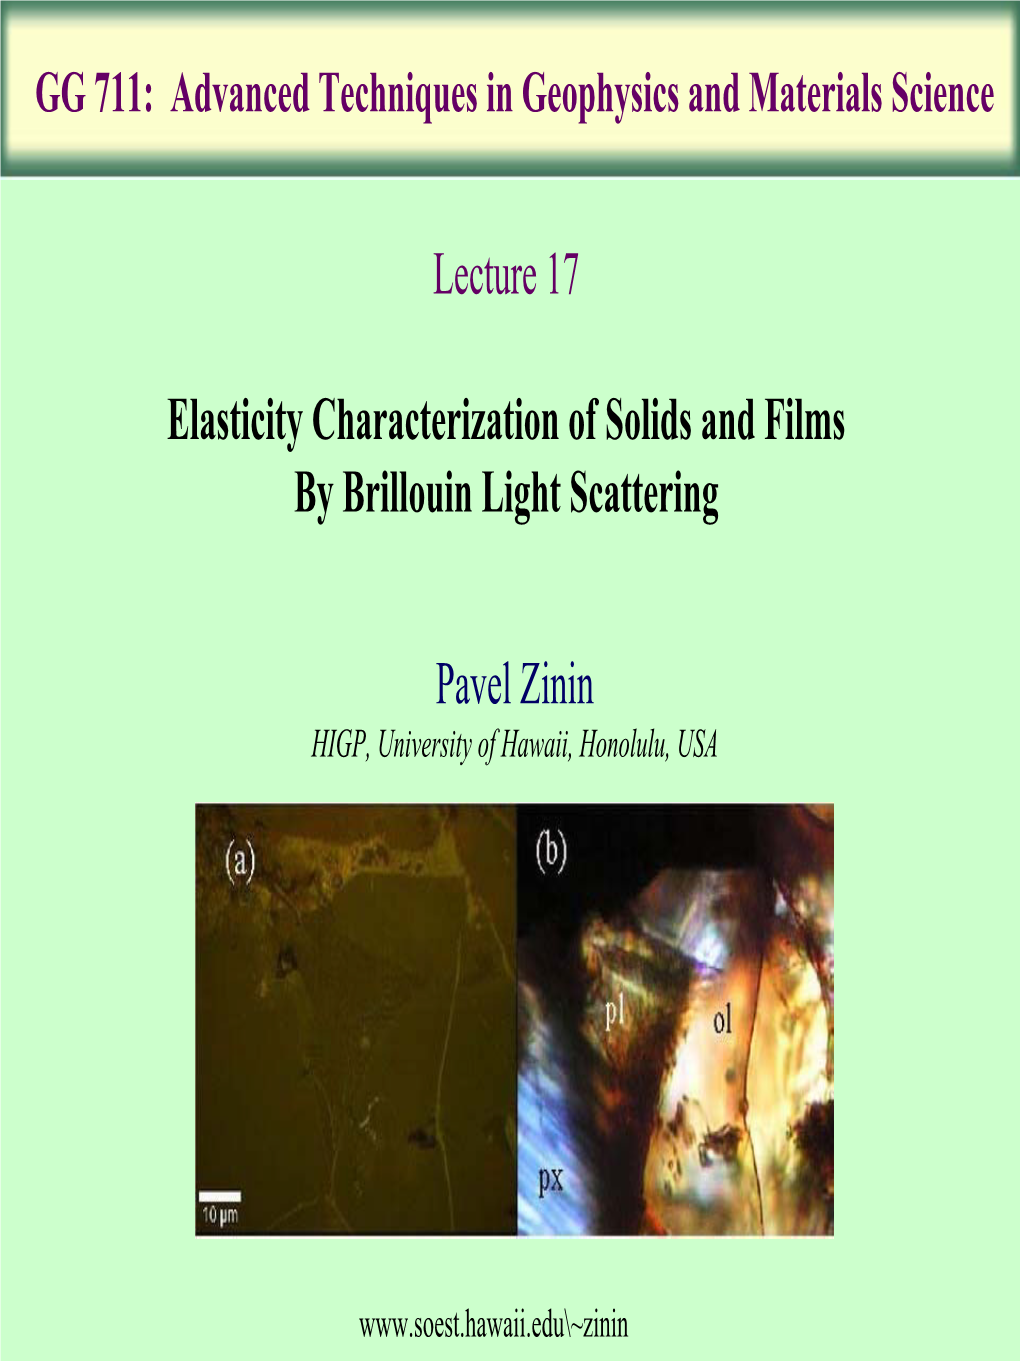 Elasticity Characterization of Solids and Films by Brillouin Light Scattering